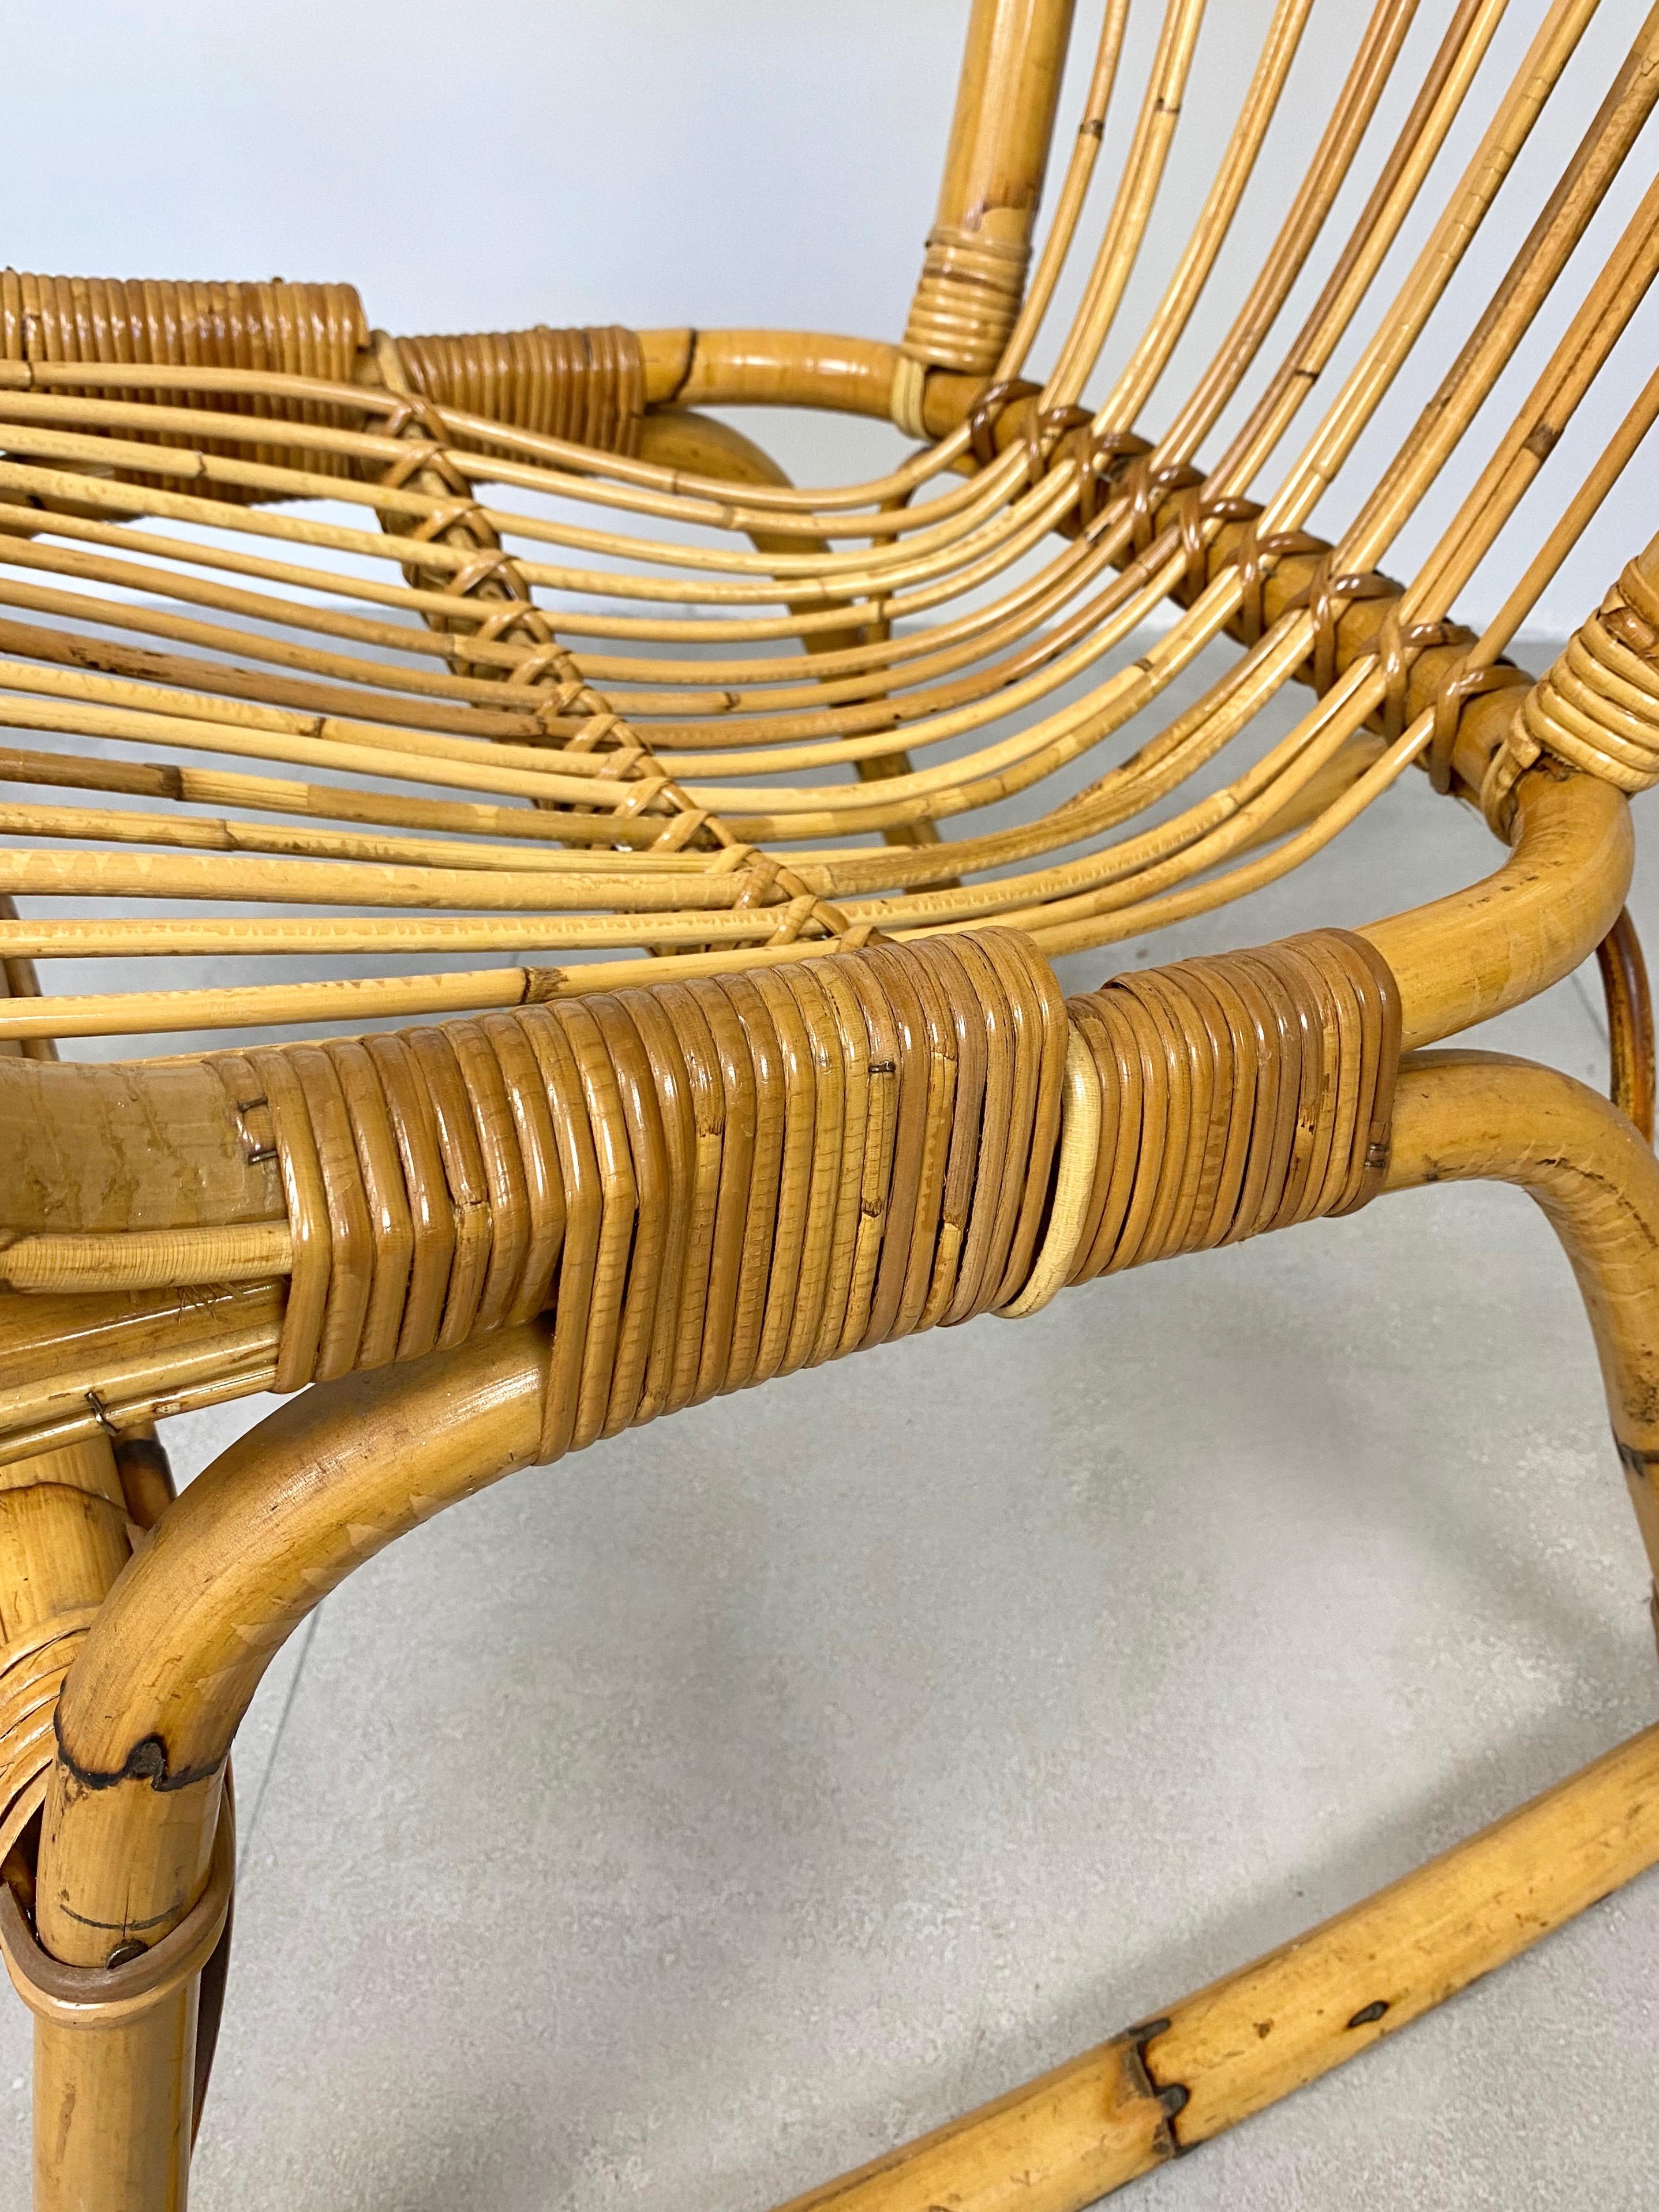 Bamboo Wicker Rocking Chair, Italy, 1960s For Sale 1